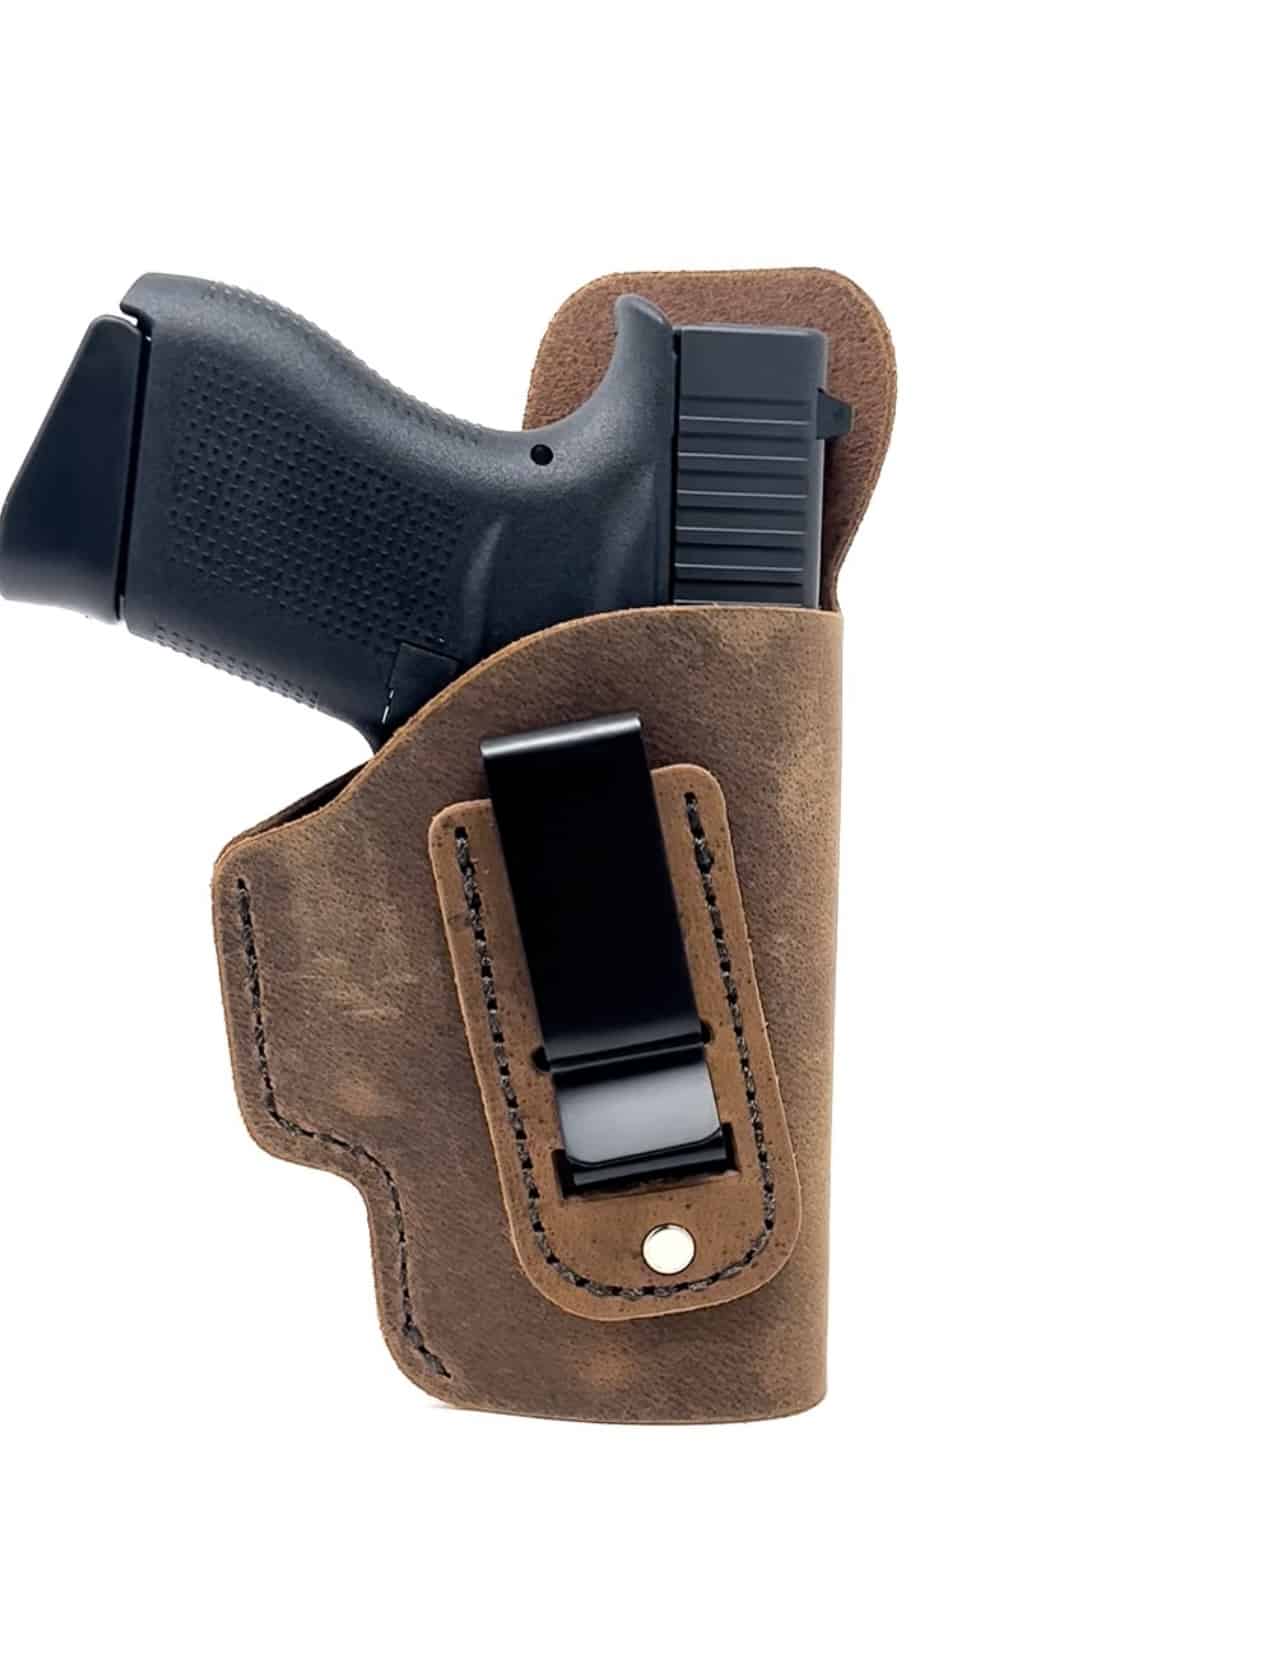 OWB FOR HI-POINT 380 PRO TACTICAL GUN HOLSTER CONCEALED CARRY IWB 